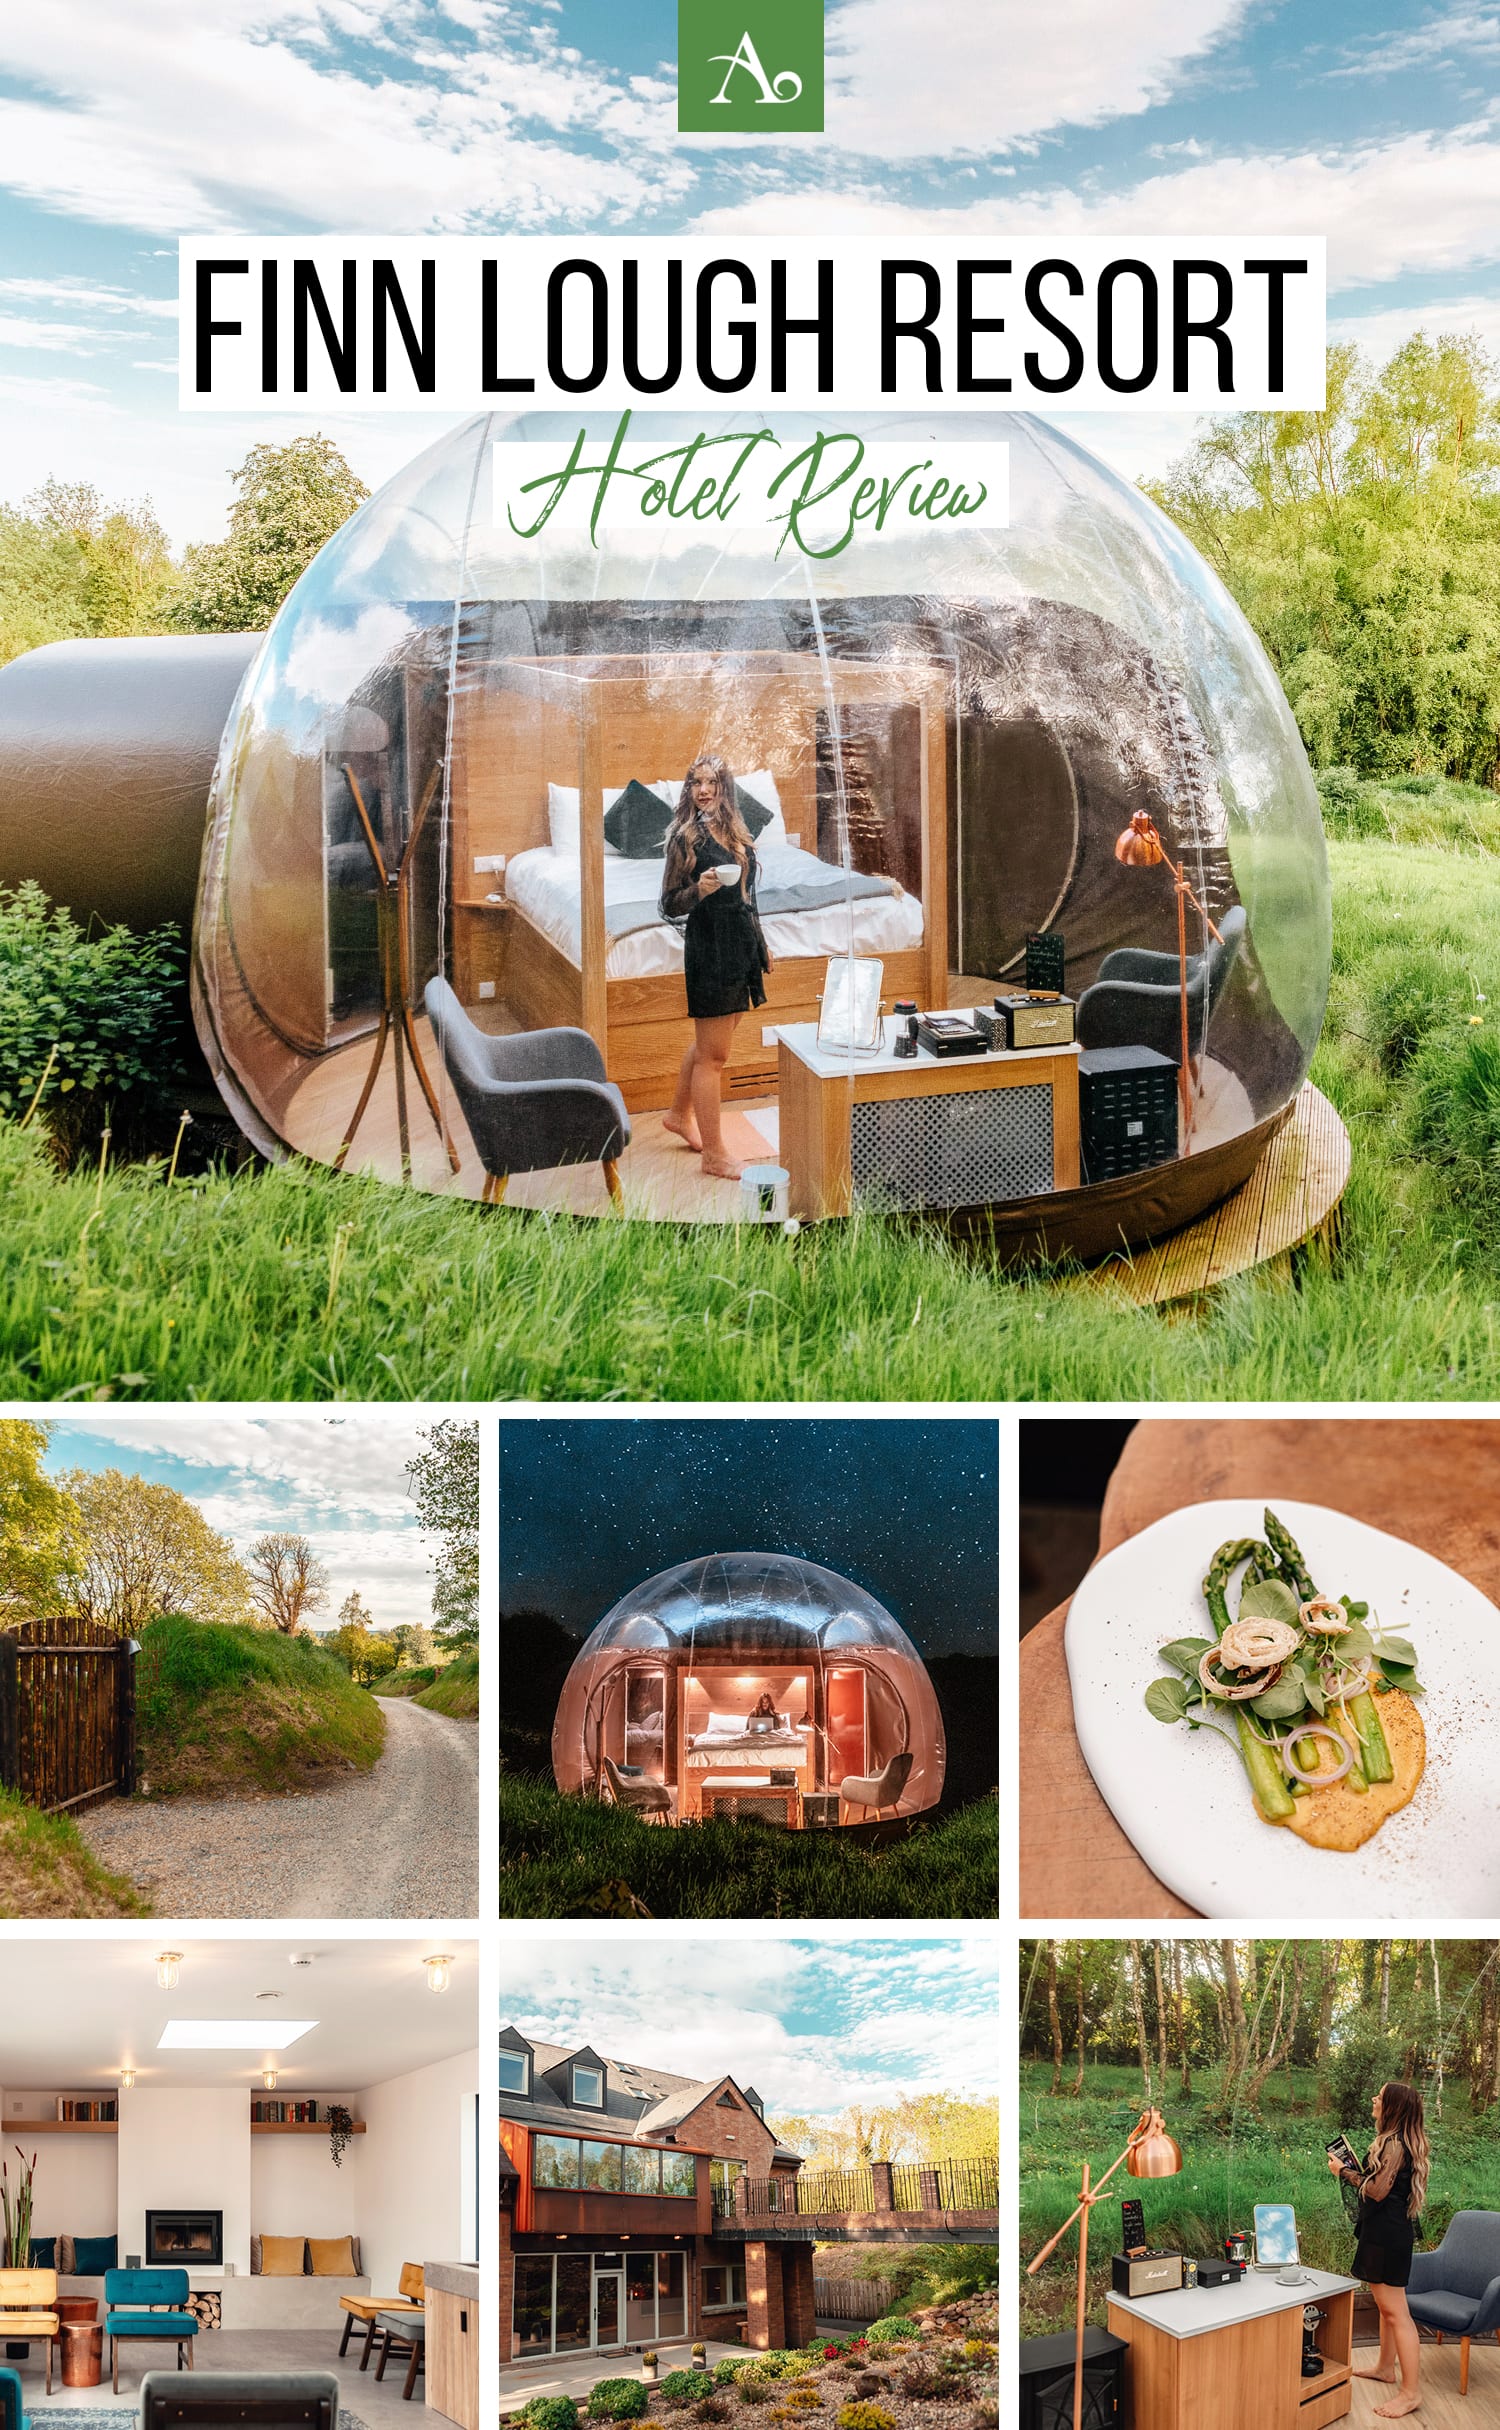 Finn Lough Resort - Stay in a Bubble Dome in Northern Ireland